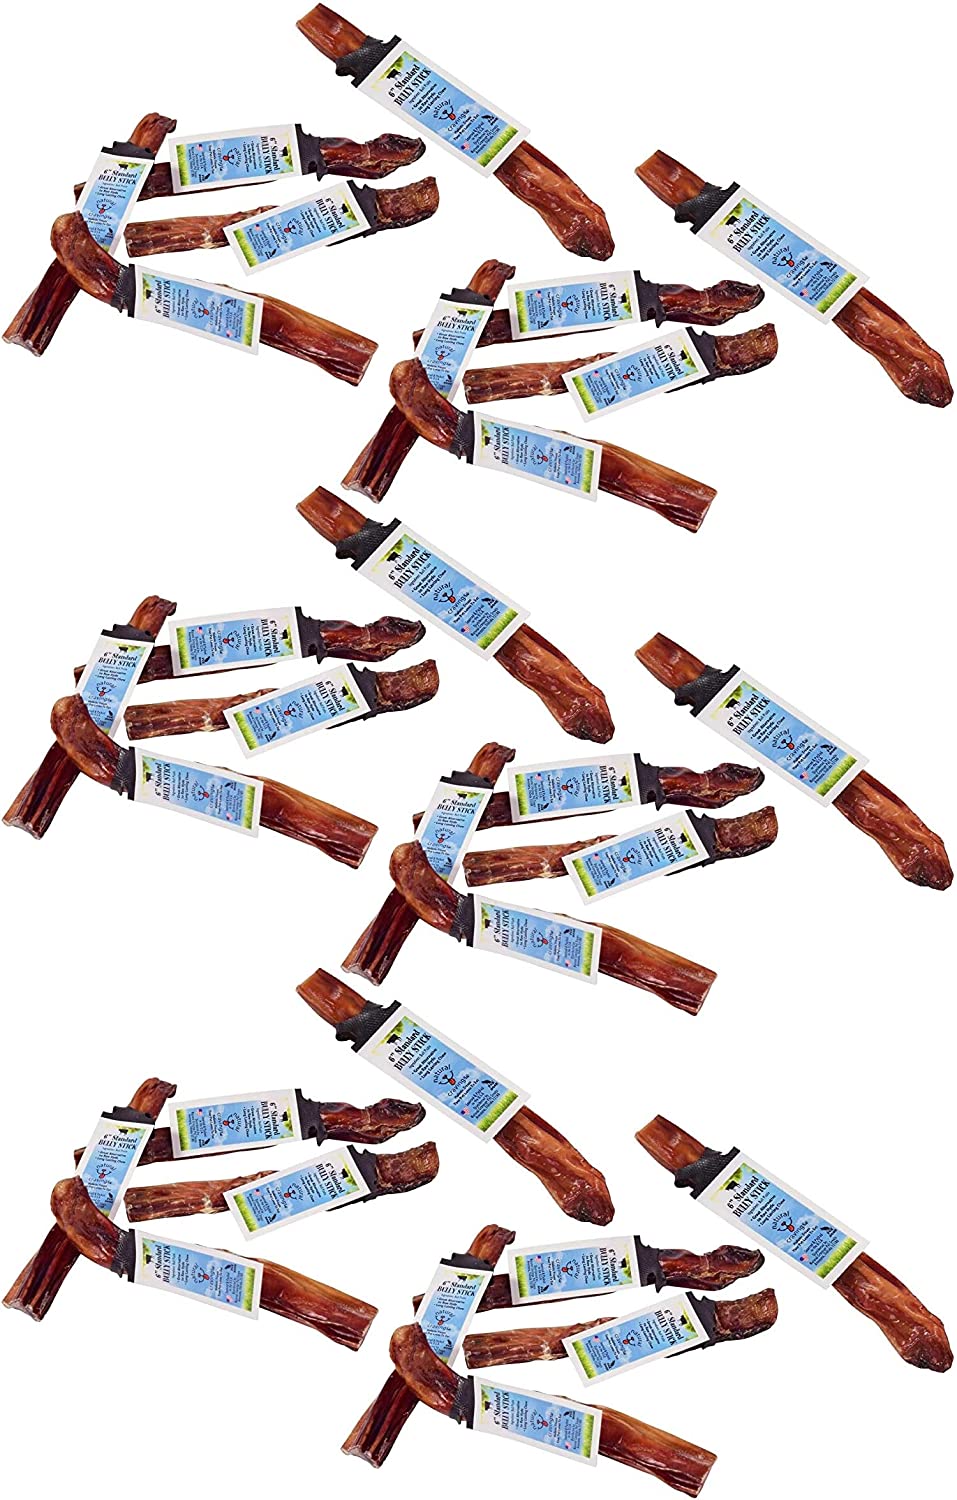 Natural Cravings USA Standard Steer Dog Bully Sticks Display - 6 Inch - 50 Count  